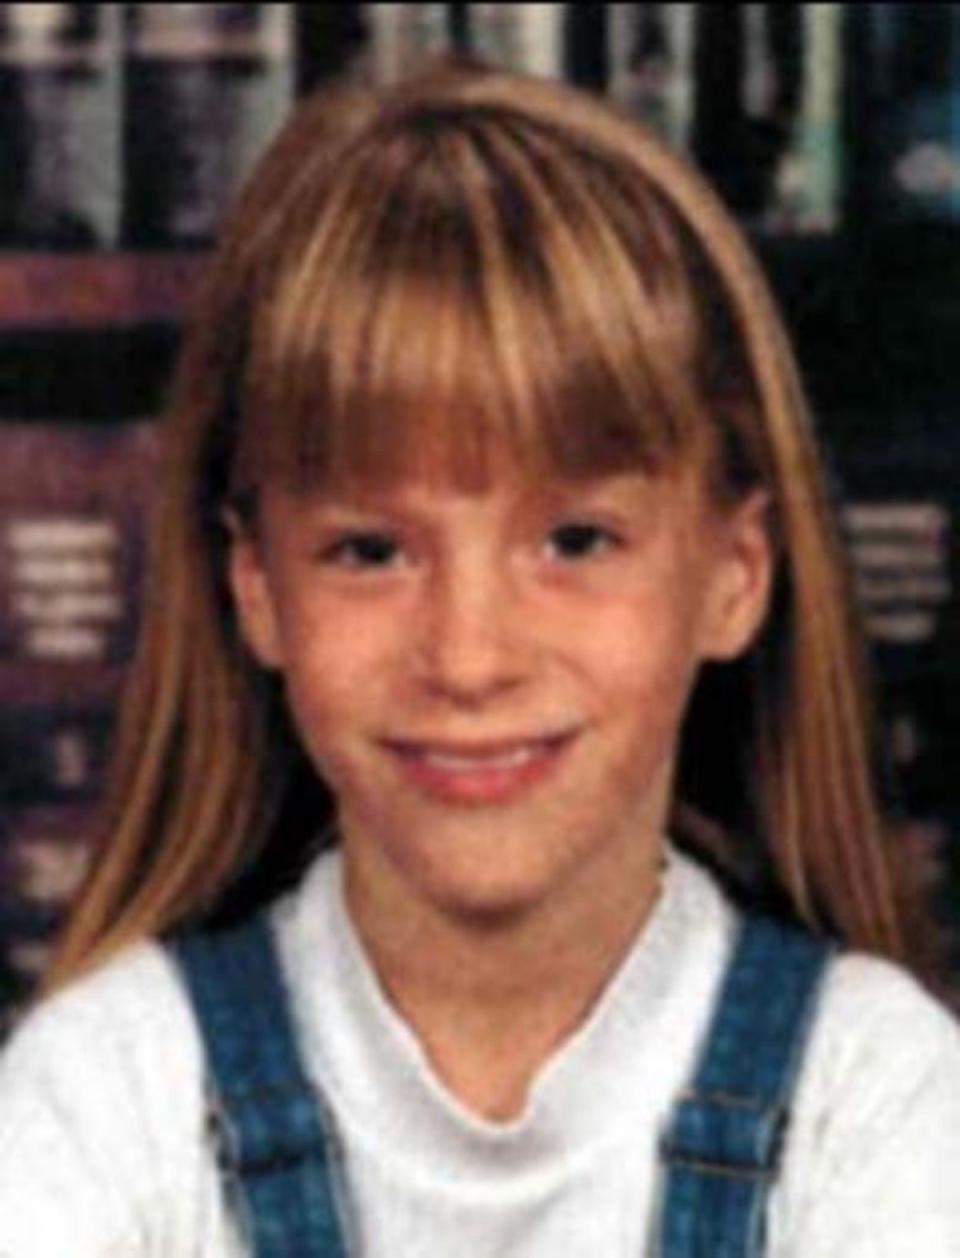 Alex Carter was 10 years old when she vanished in August 2000 (FBI)